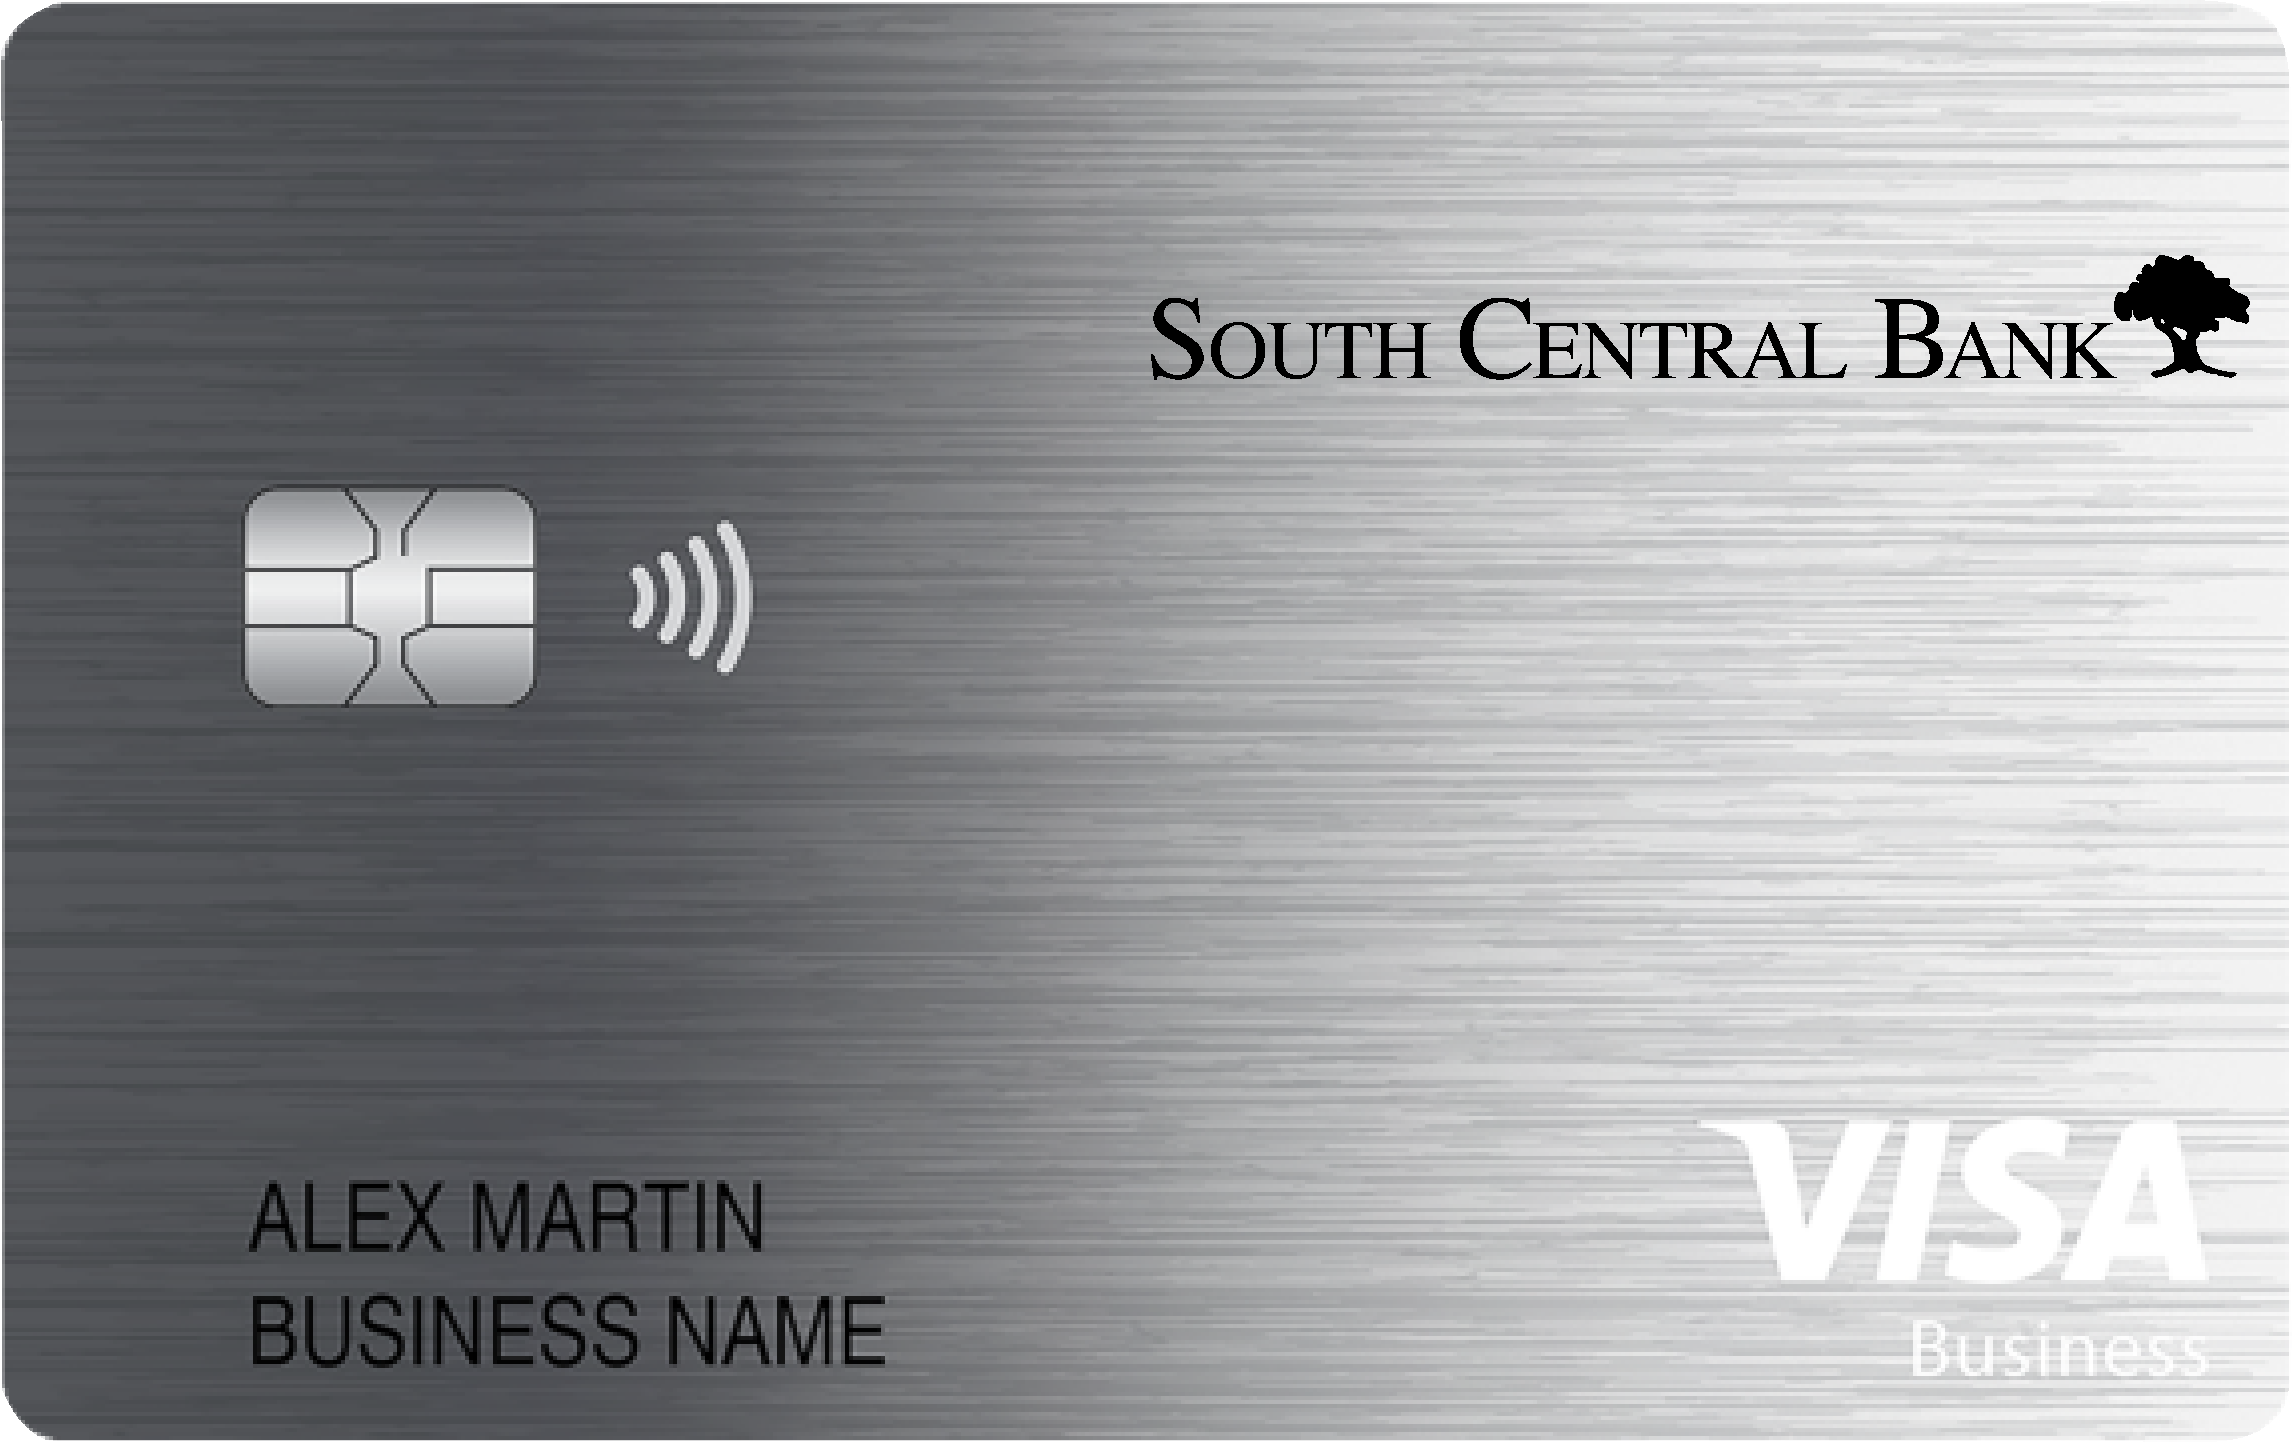 South Central Bank Inc Business Real Rewards Card